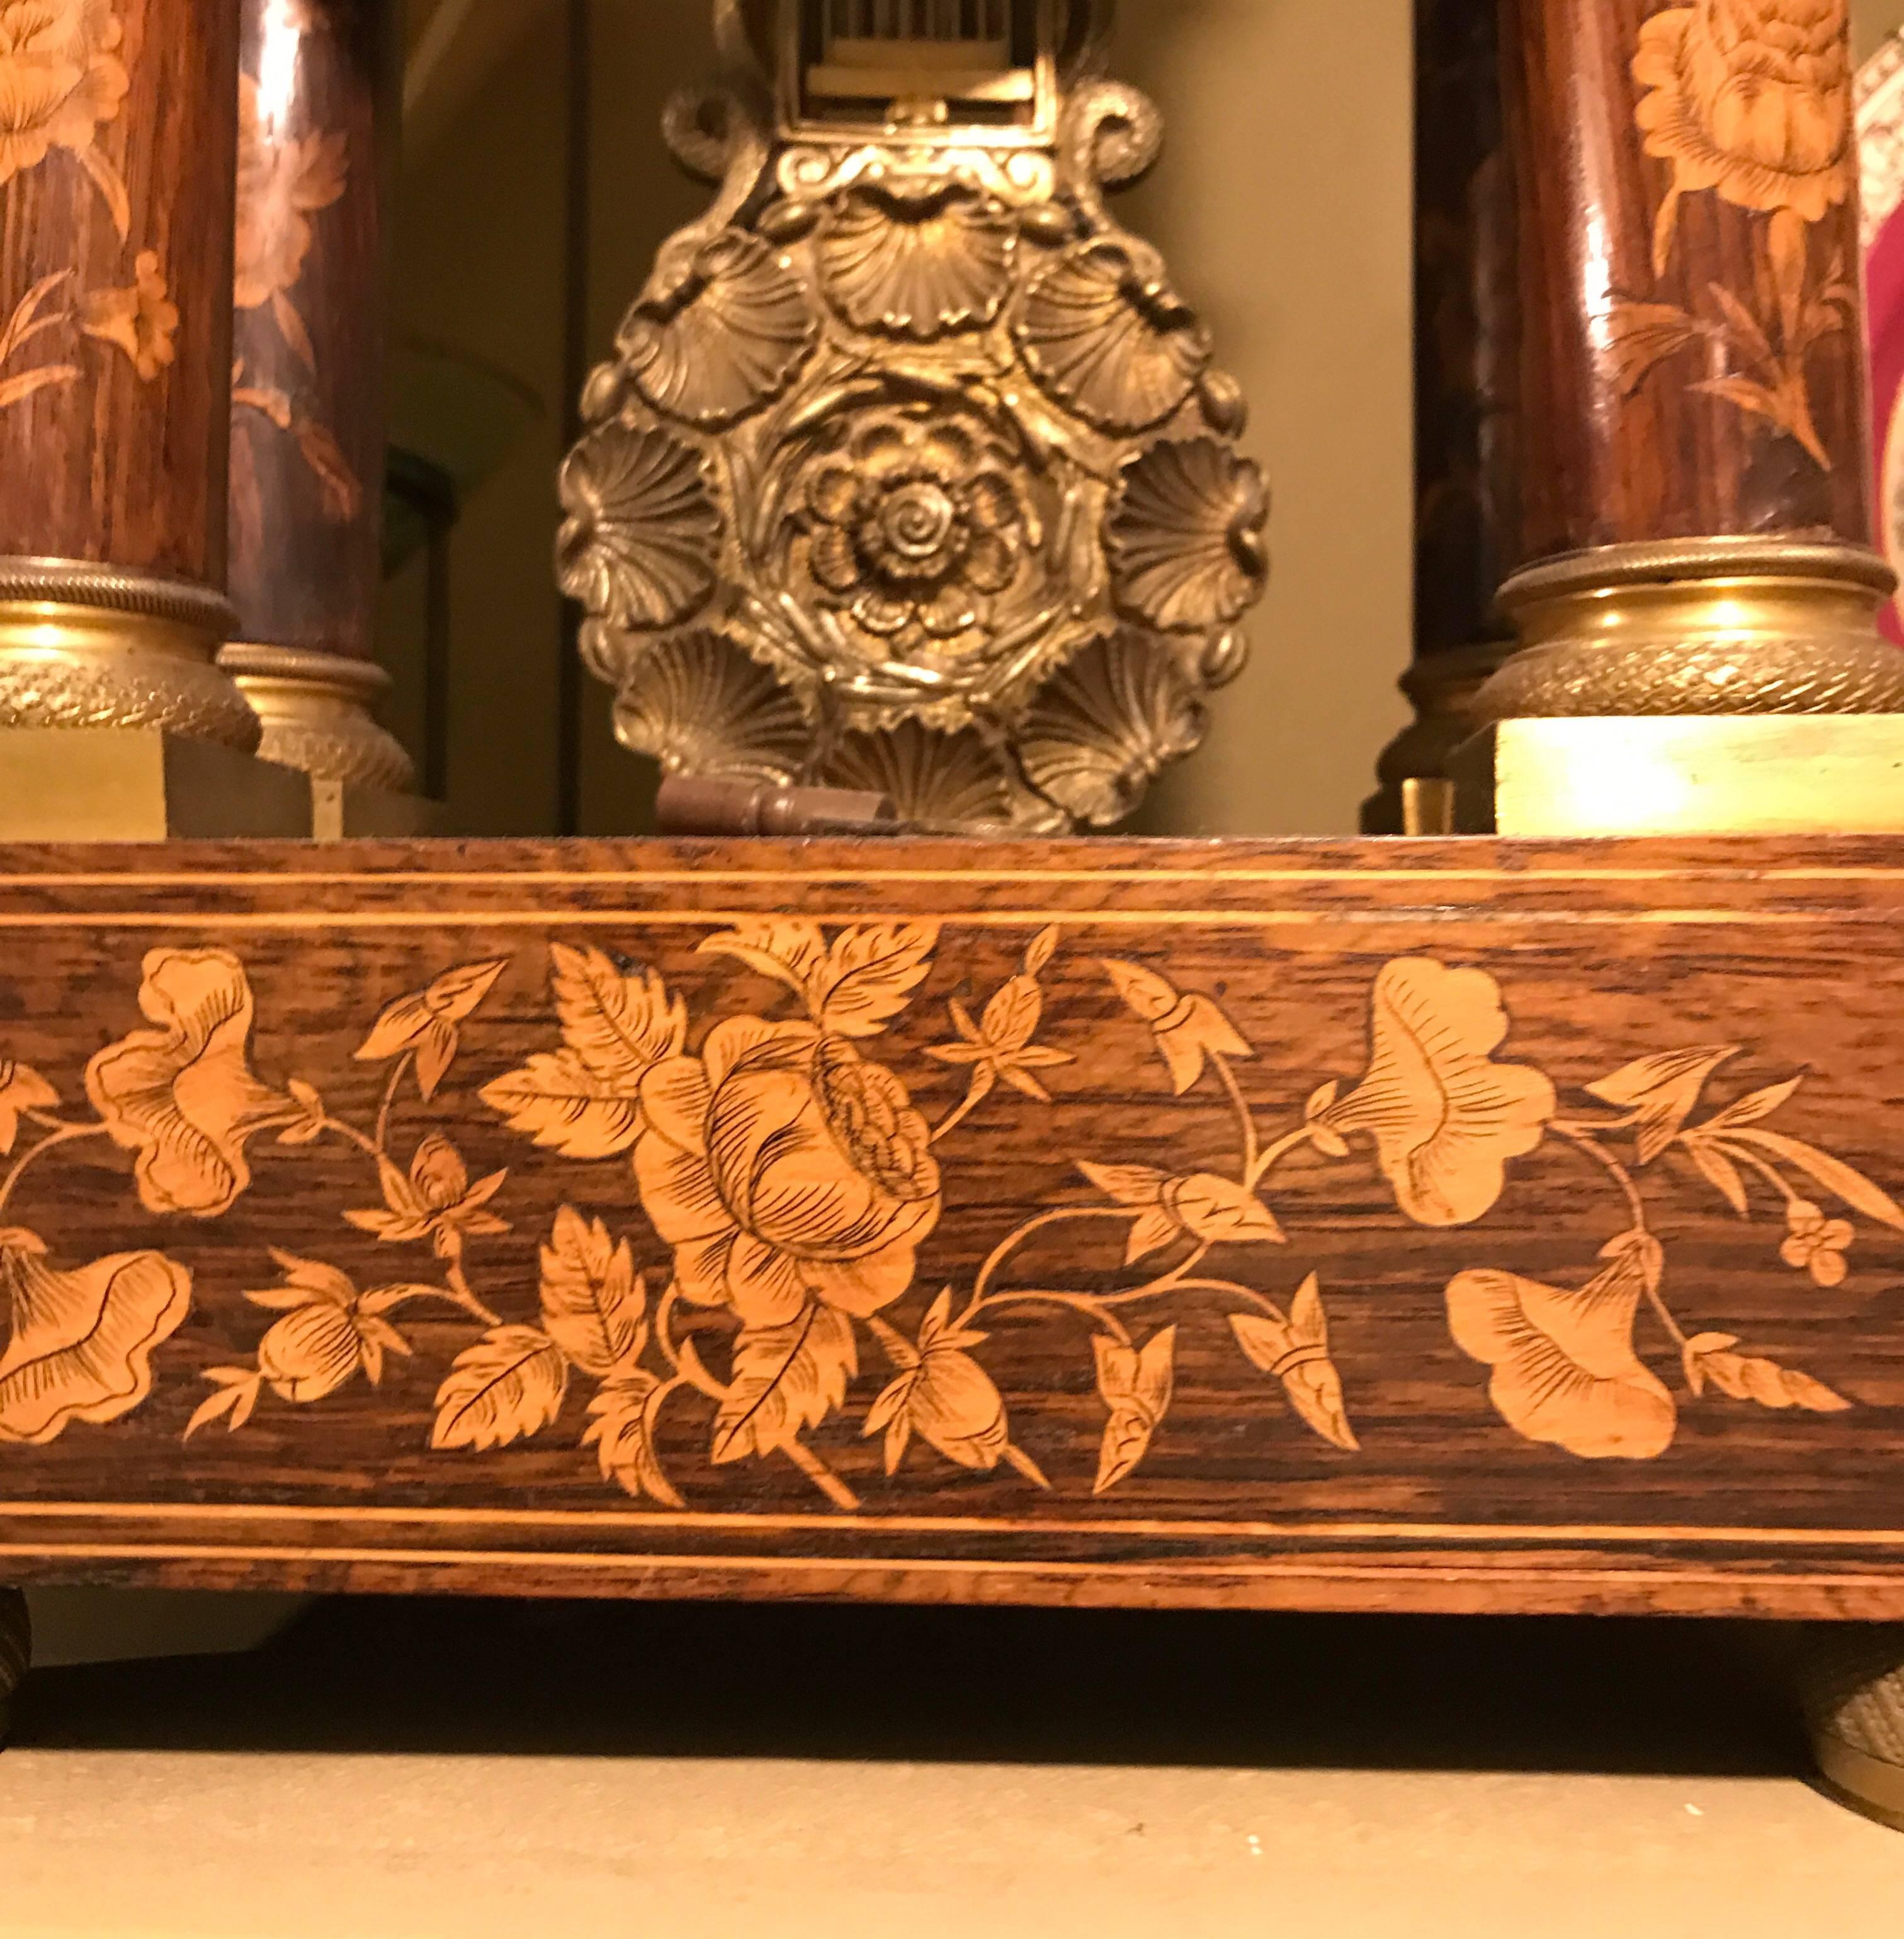 Mantelpiece clock complete and off the empire period, circa 1810
Beautiful inlaid marquetry off rosewood and other nobel woods
In working condition
Extra fotos off details can be made.
 